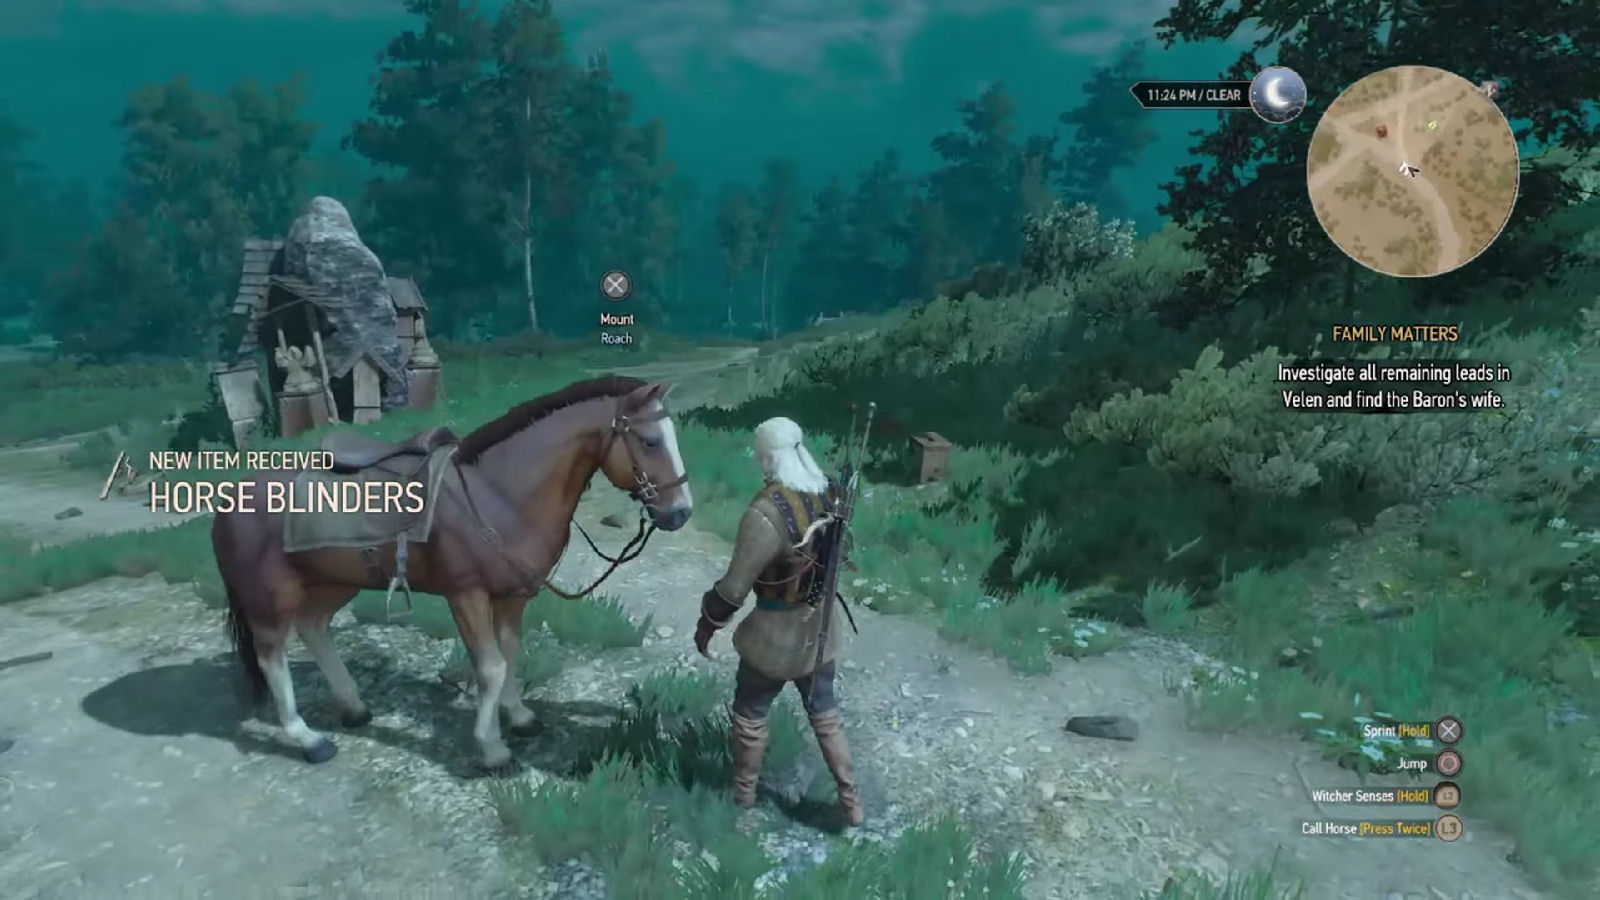 How To Call Roach Witcher 3